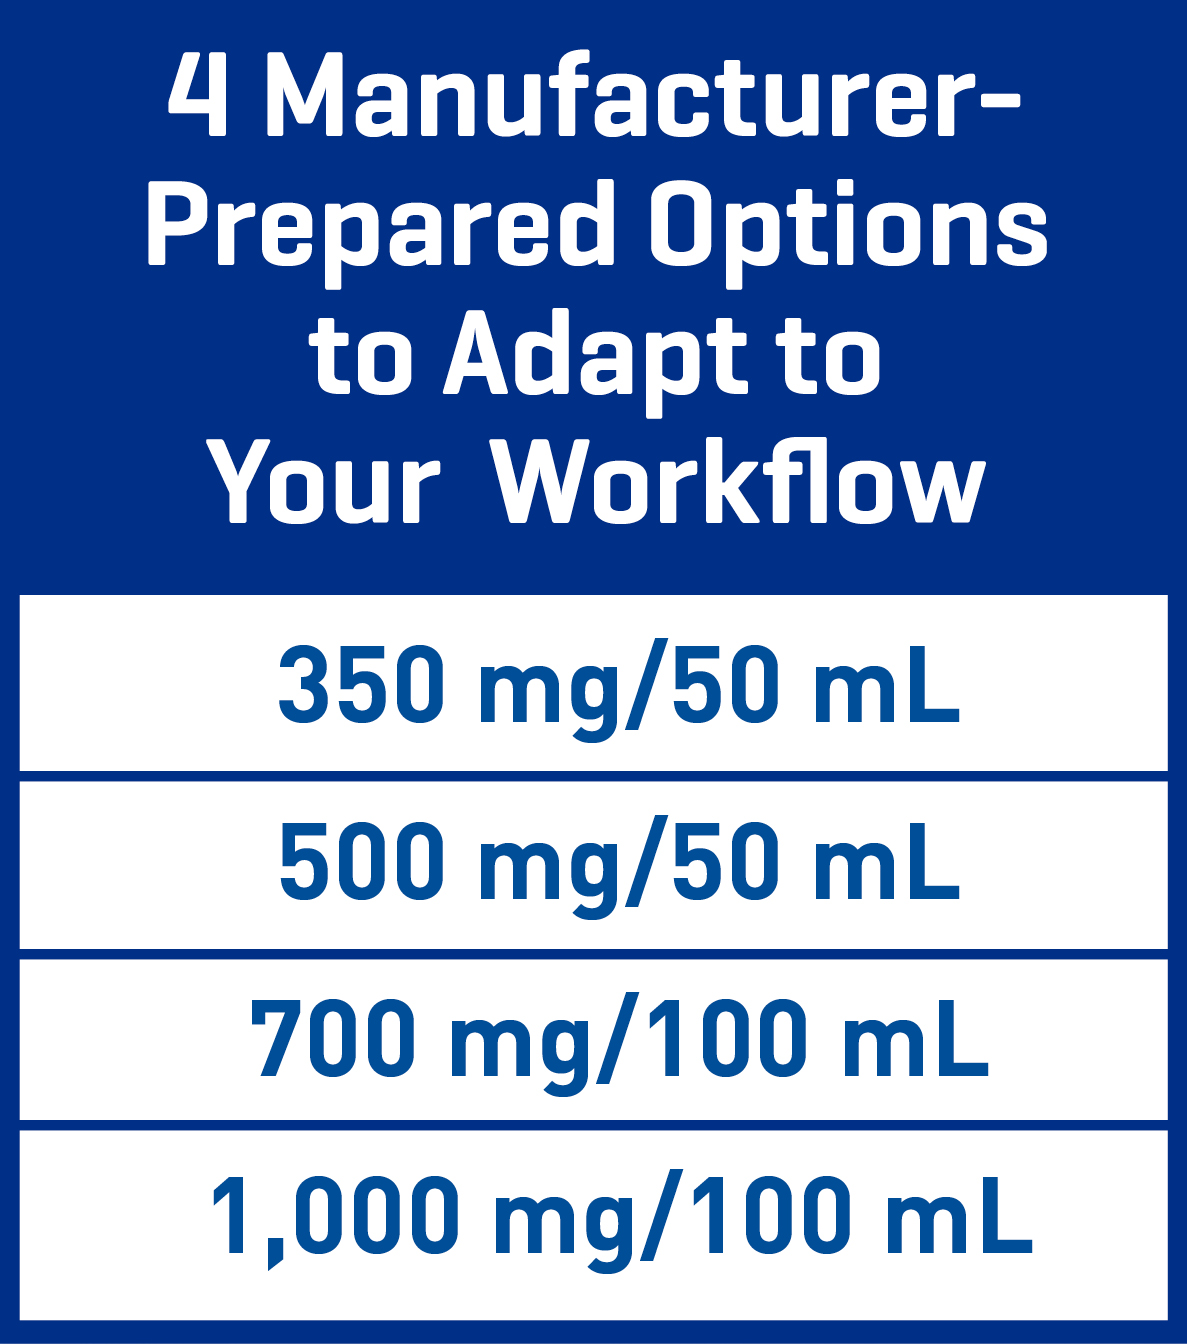 4 Manufacturer-Prepared Options to Adapt to Your Workflow: 350 mg/50 mL, 500 mg/50 mL, 700 mg/100 ML, 1,000 mg/100 mL